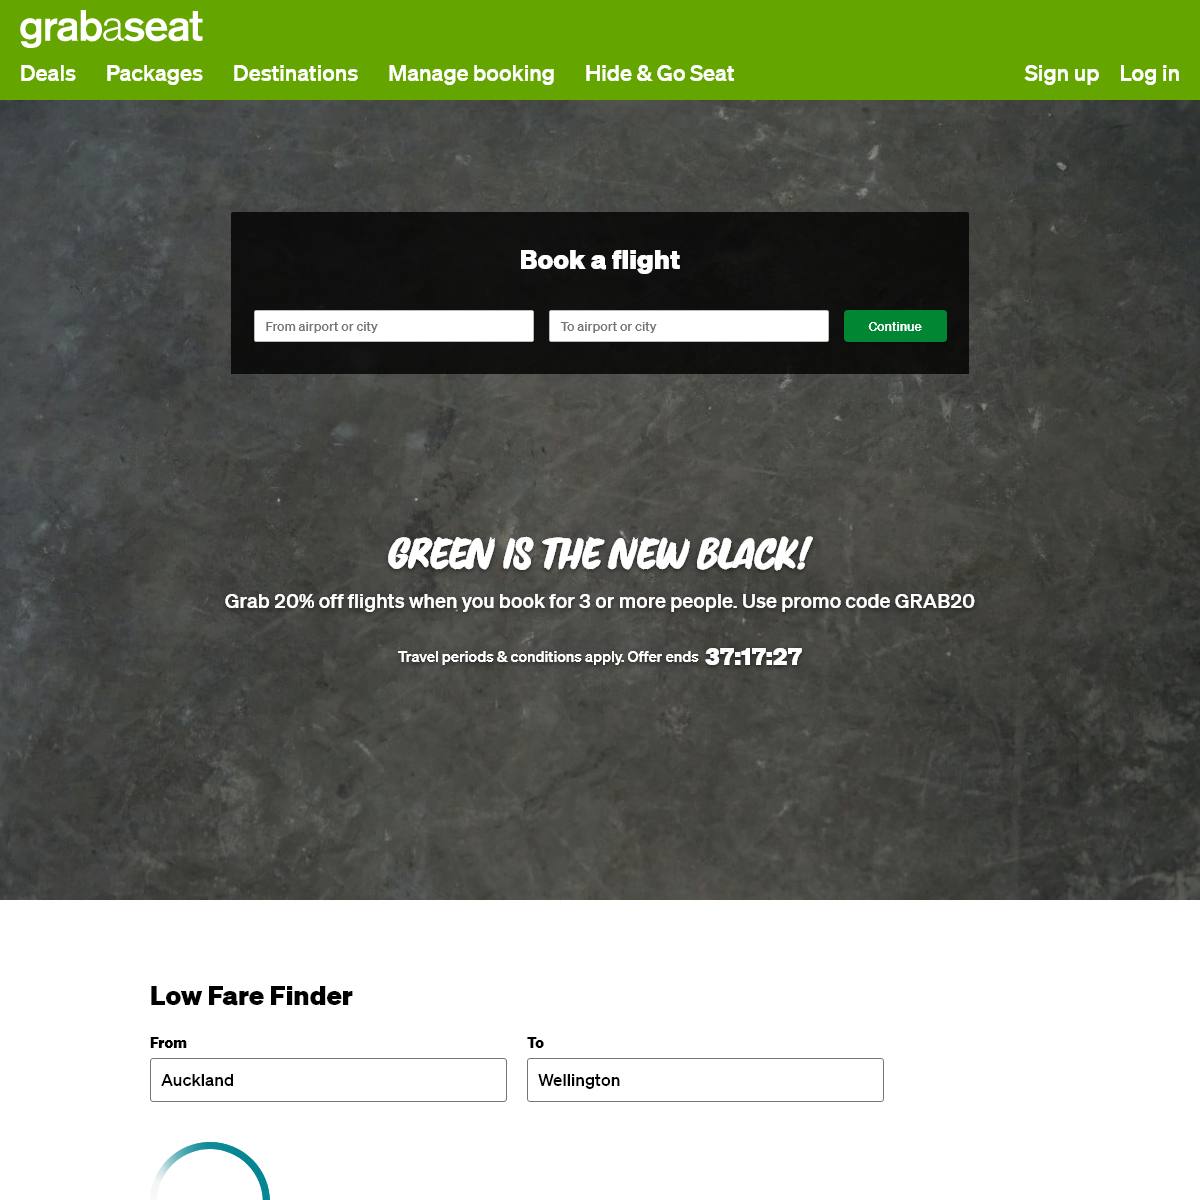 A complete backup of grabaseat.co.nz